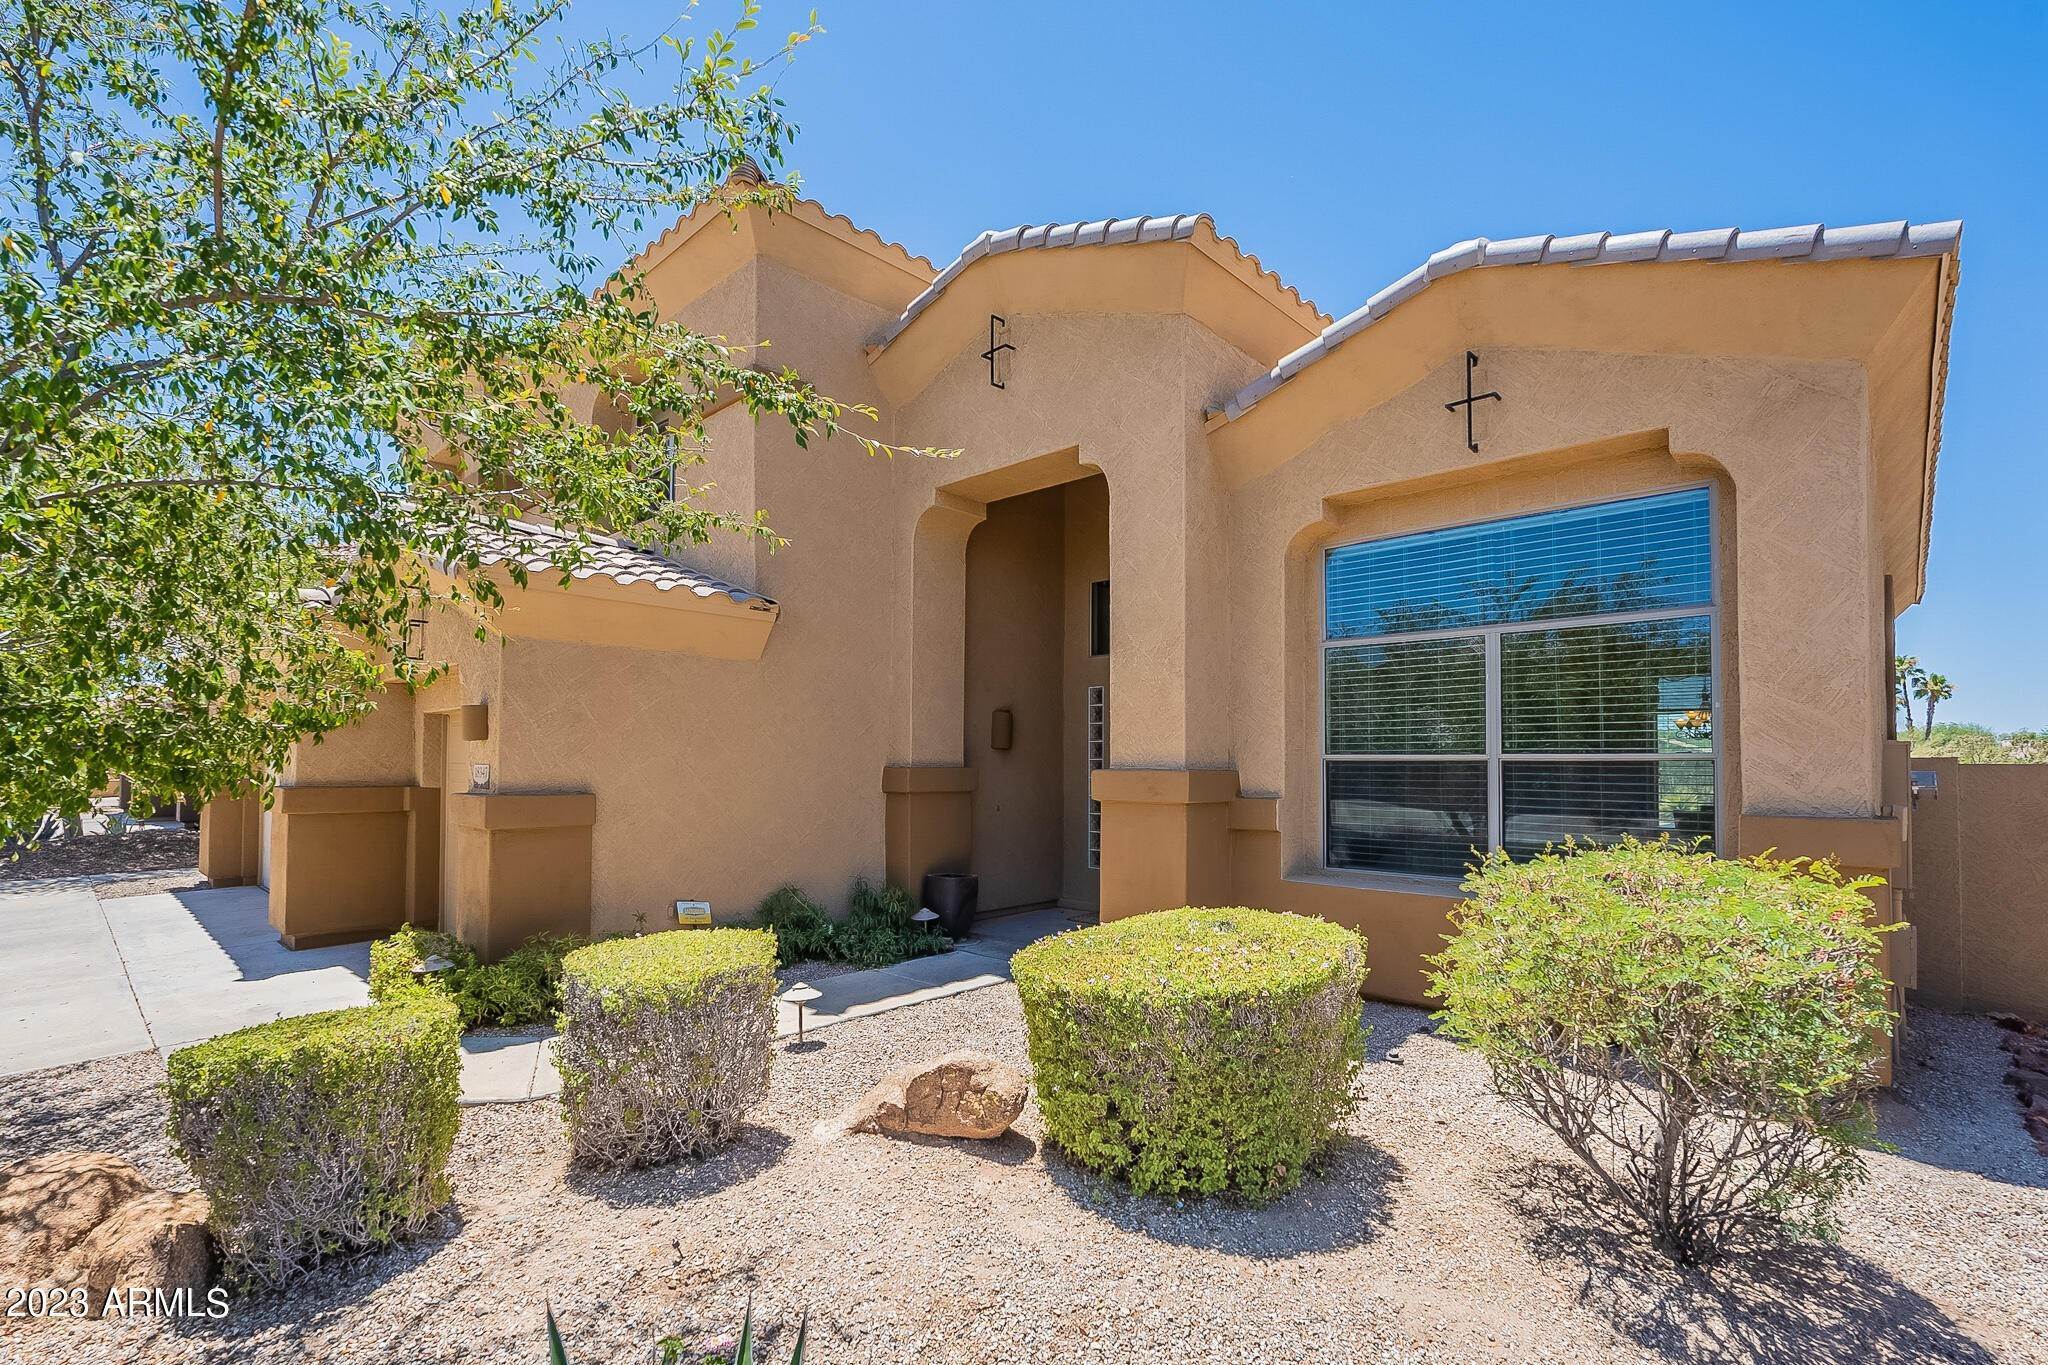 15. Single Family for Sale at Goodyear, AZ 85338